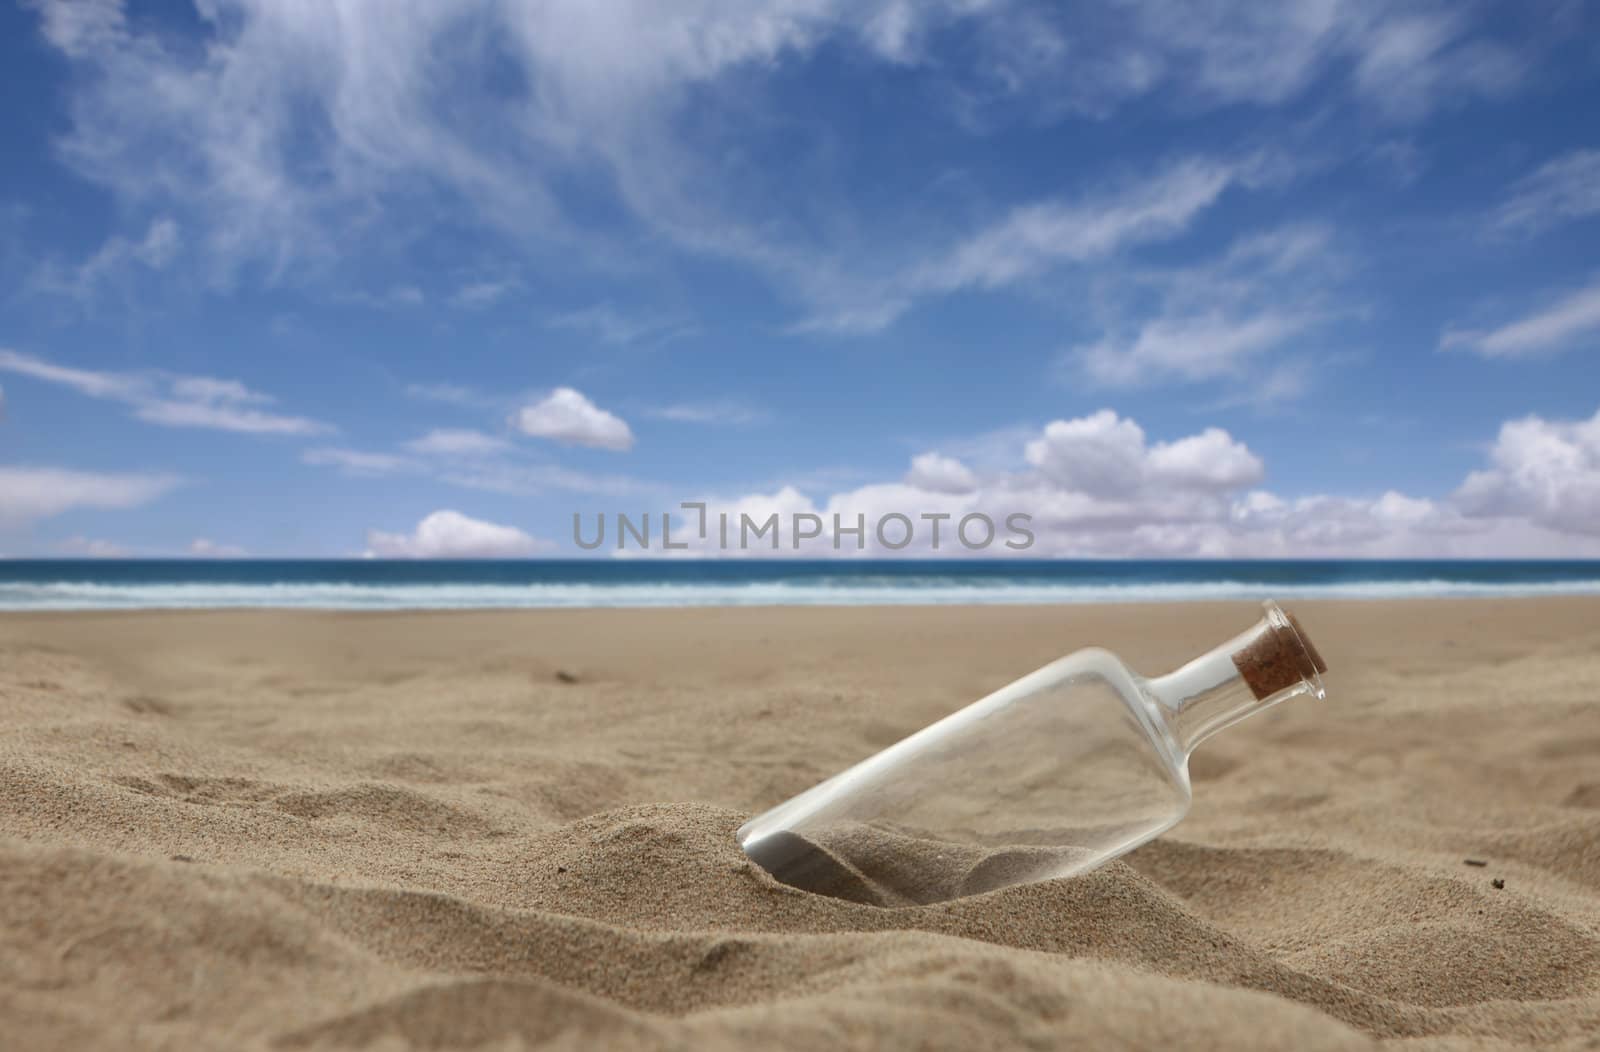 Message in a Bottle Washed Ashore a Beach With Cork. Message is Missing.